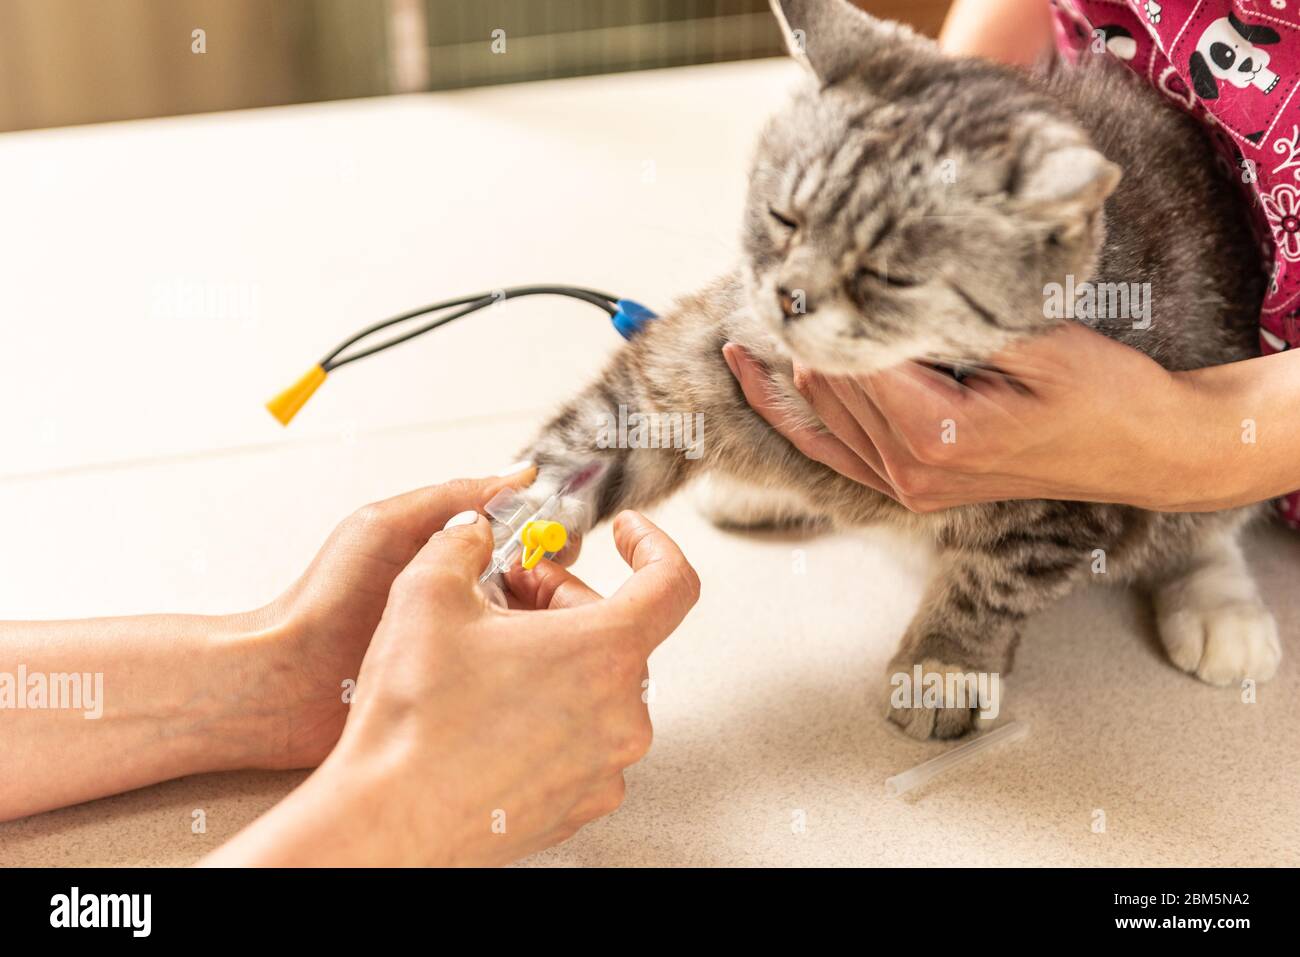 Small, gray cat in veterinary clinic. The vet doctor placing the needle IV catheter directly into the vein. on the table Stock Photo